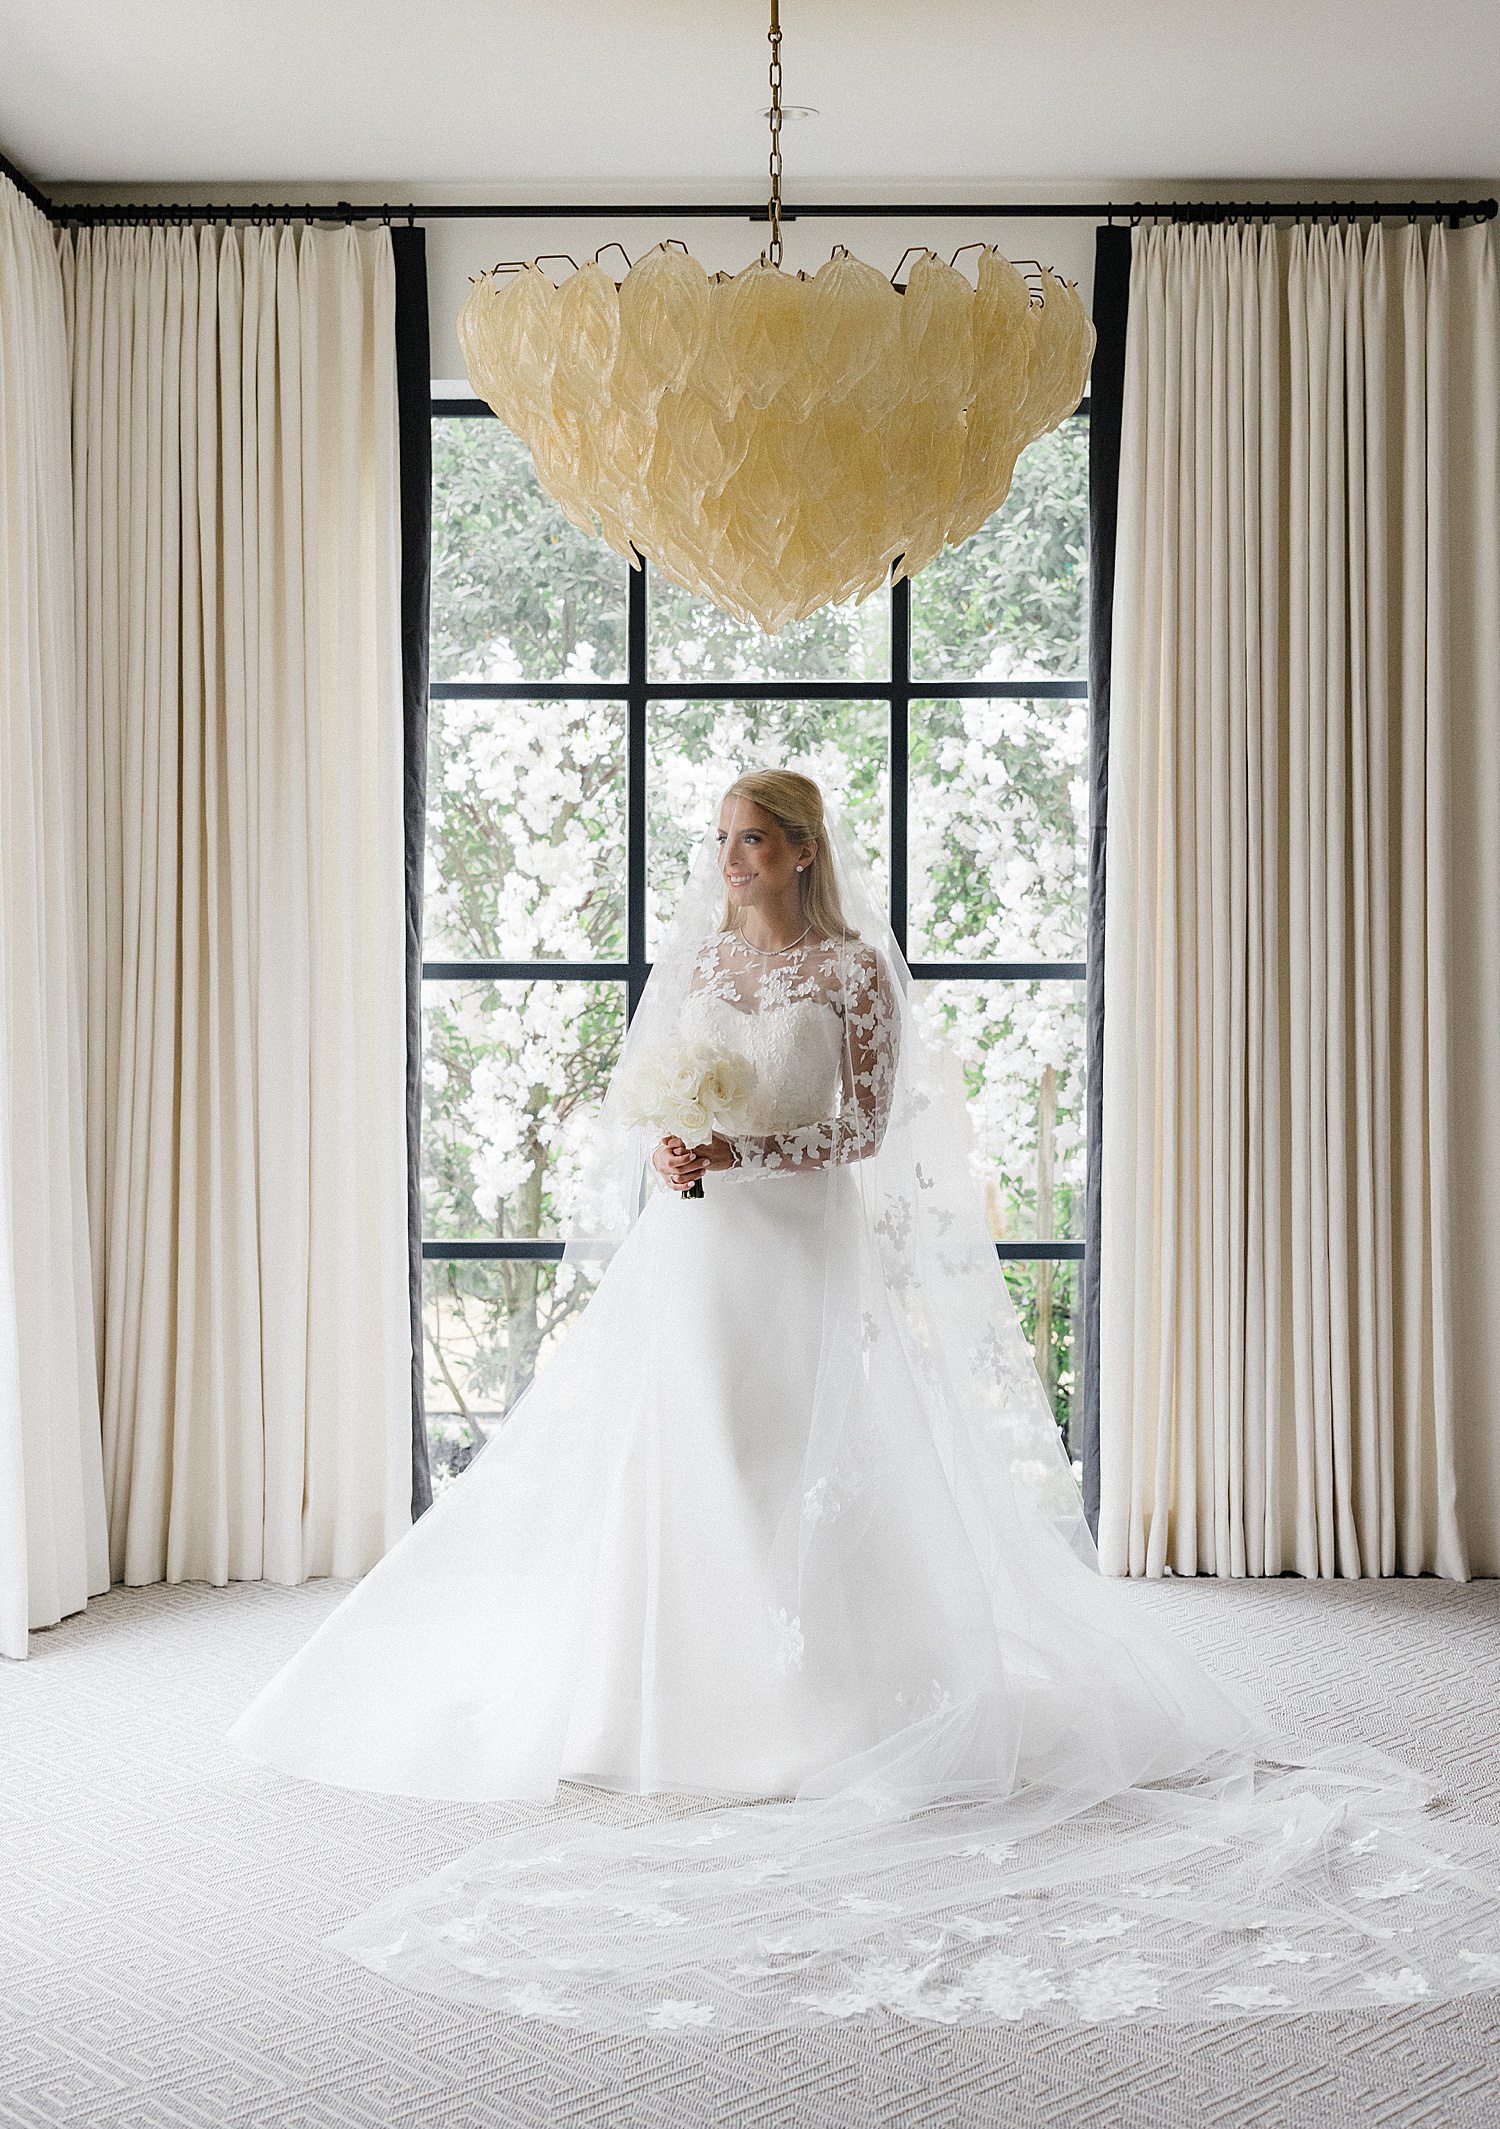 Bride holding bouquet under large chandelier, with veil and train spread out around her